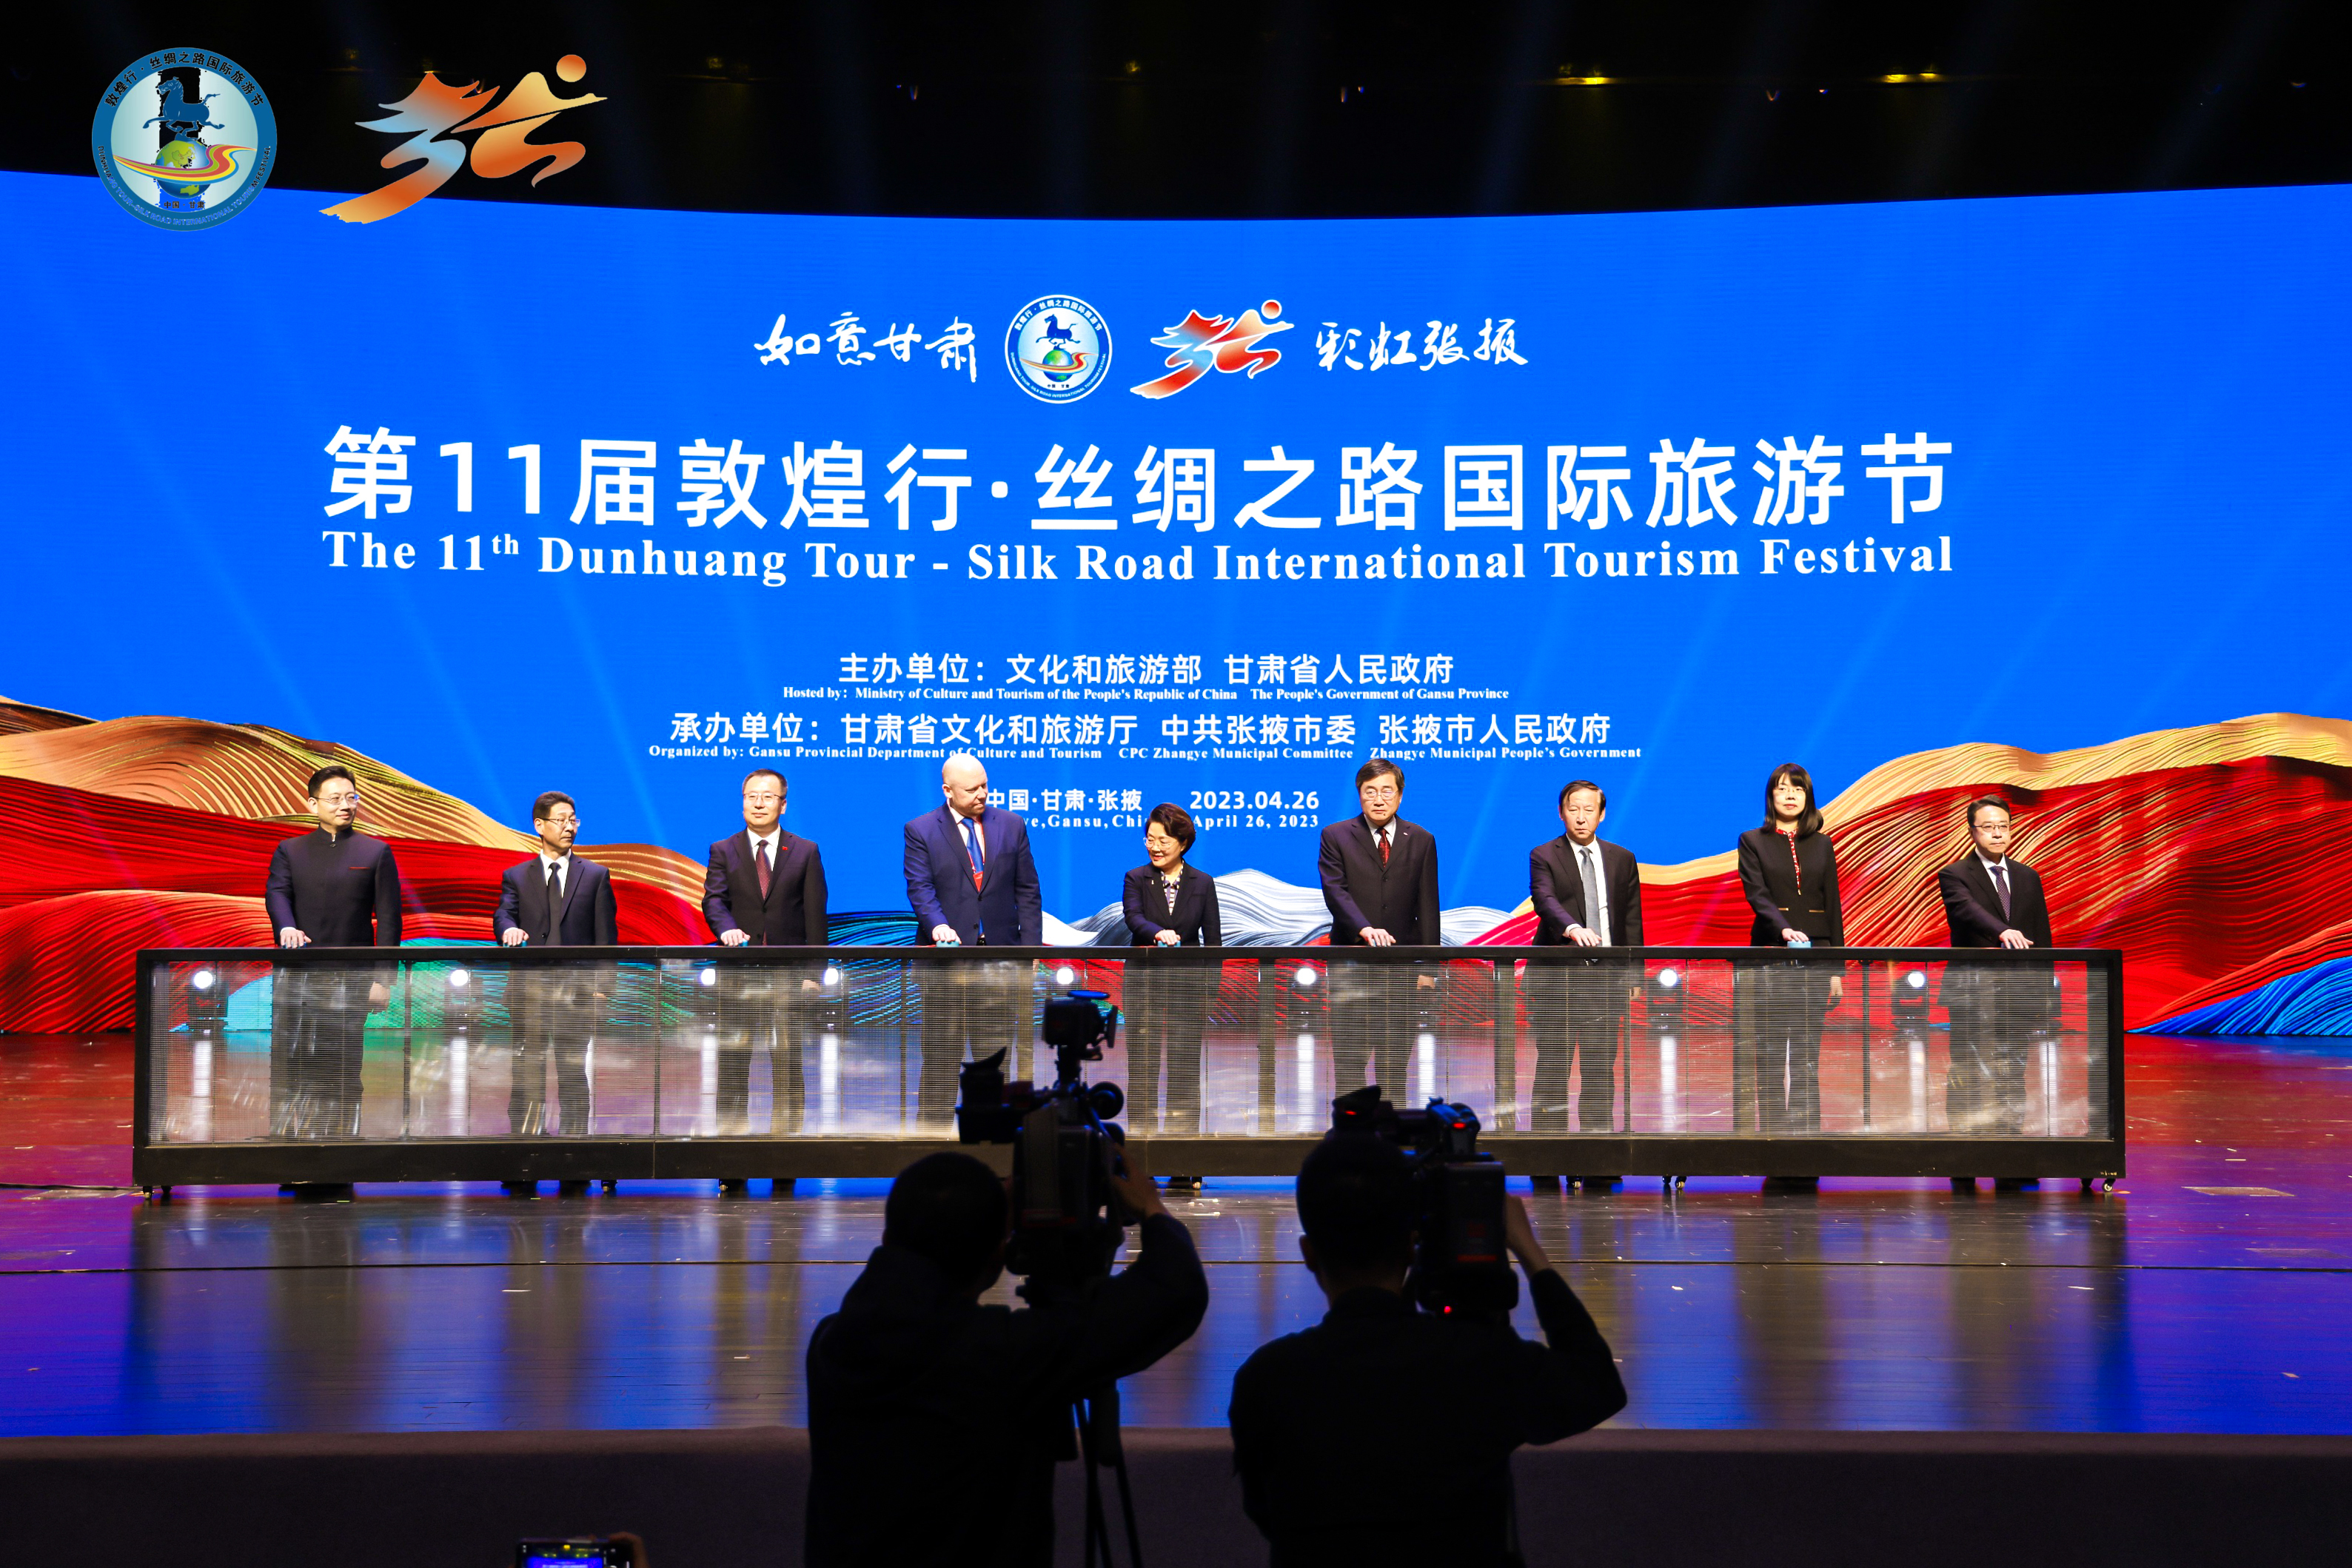 The opening ceremony of the 11th Dunhuang Tour – Silk Road International Tourism Festival